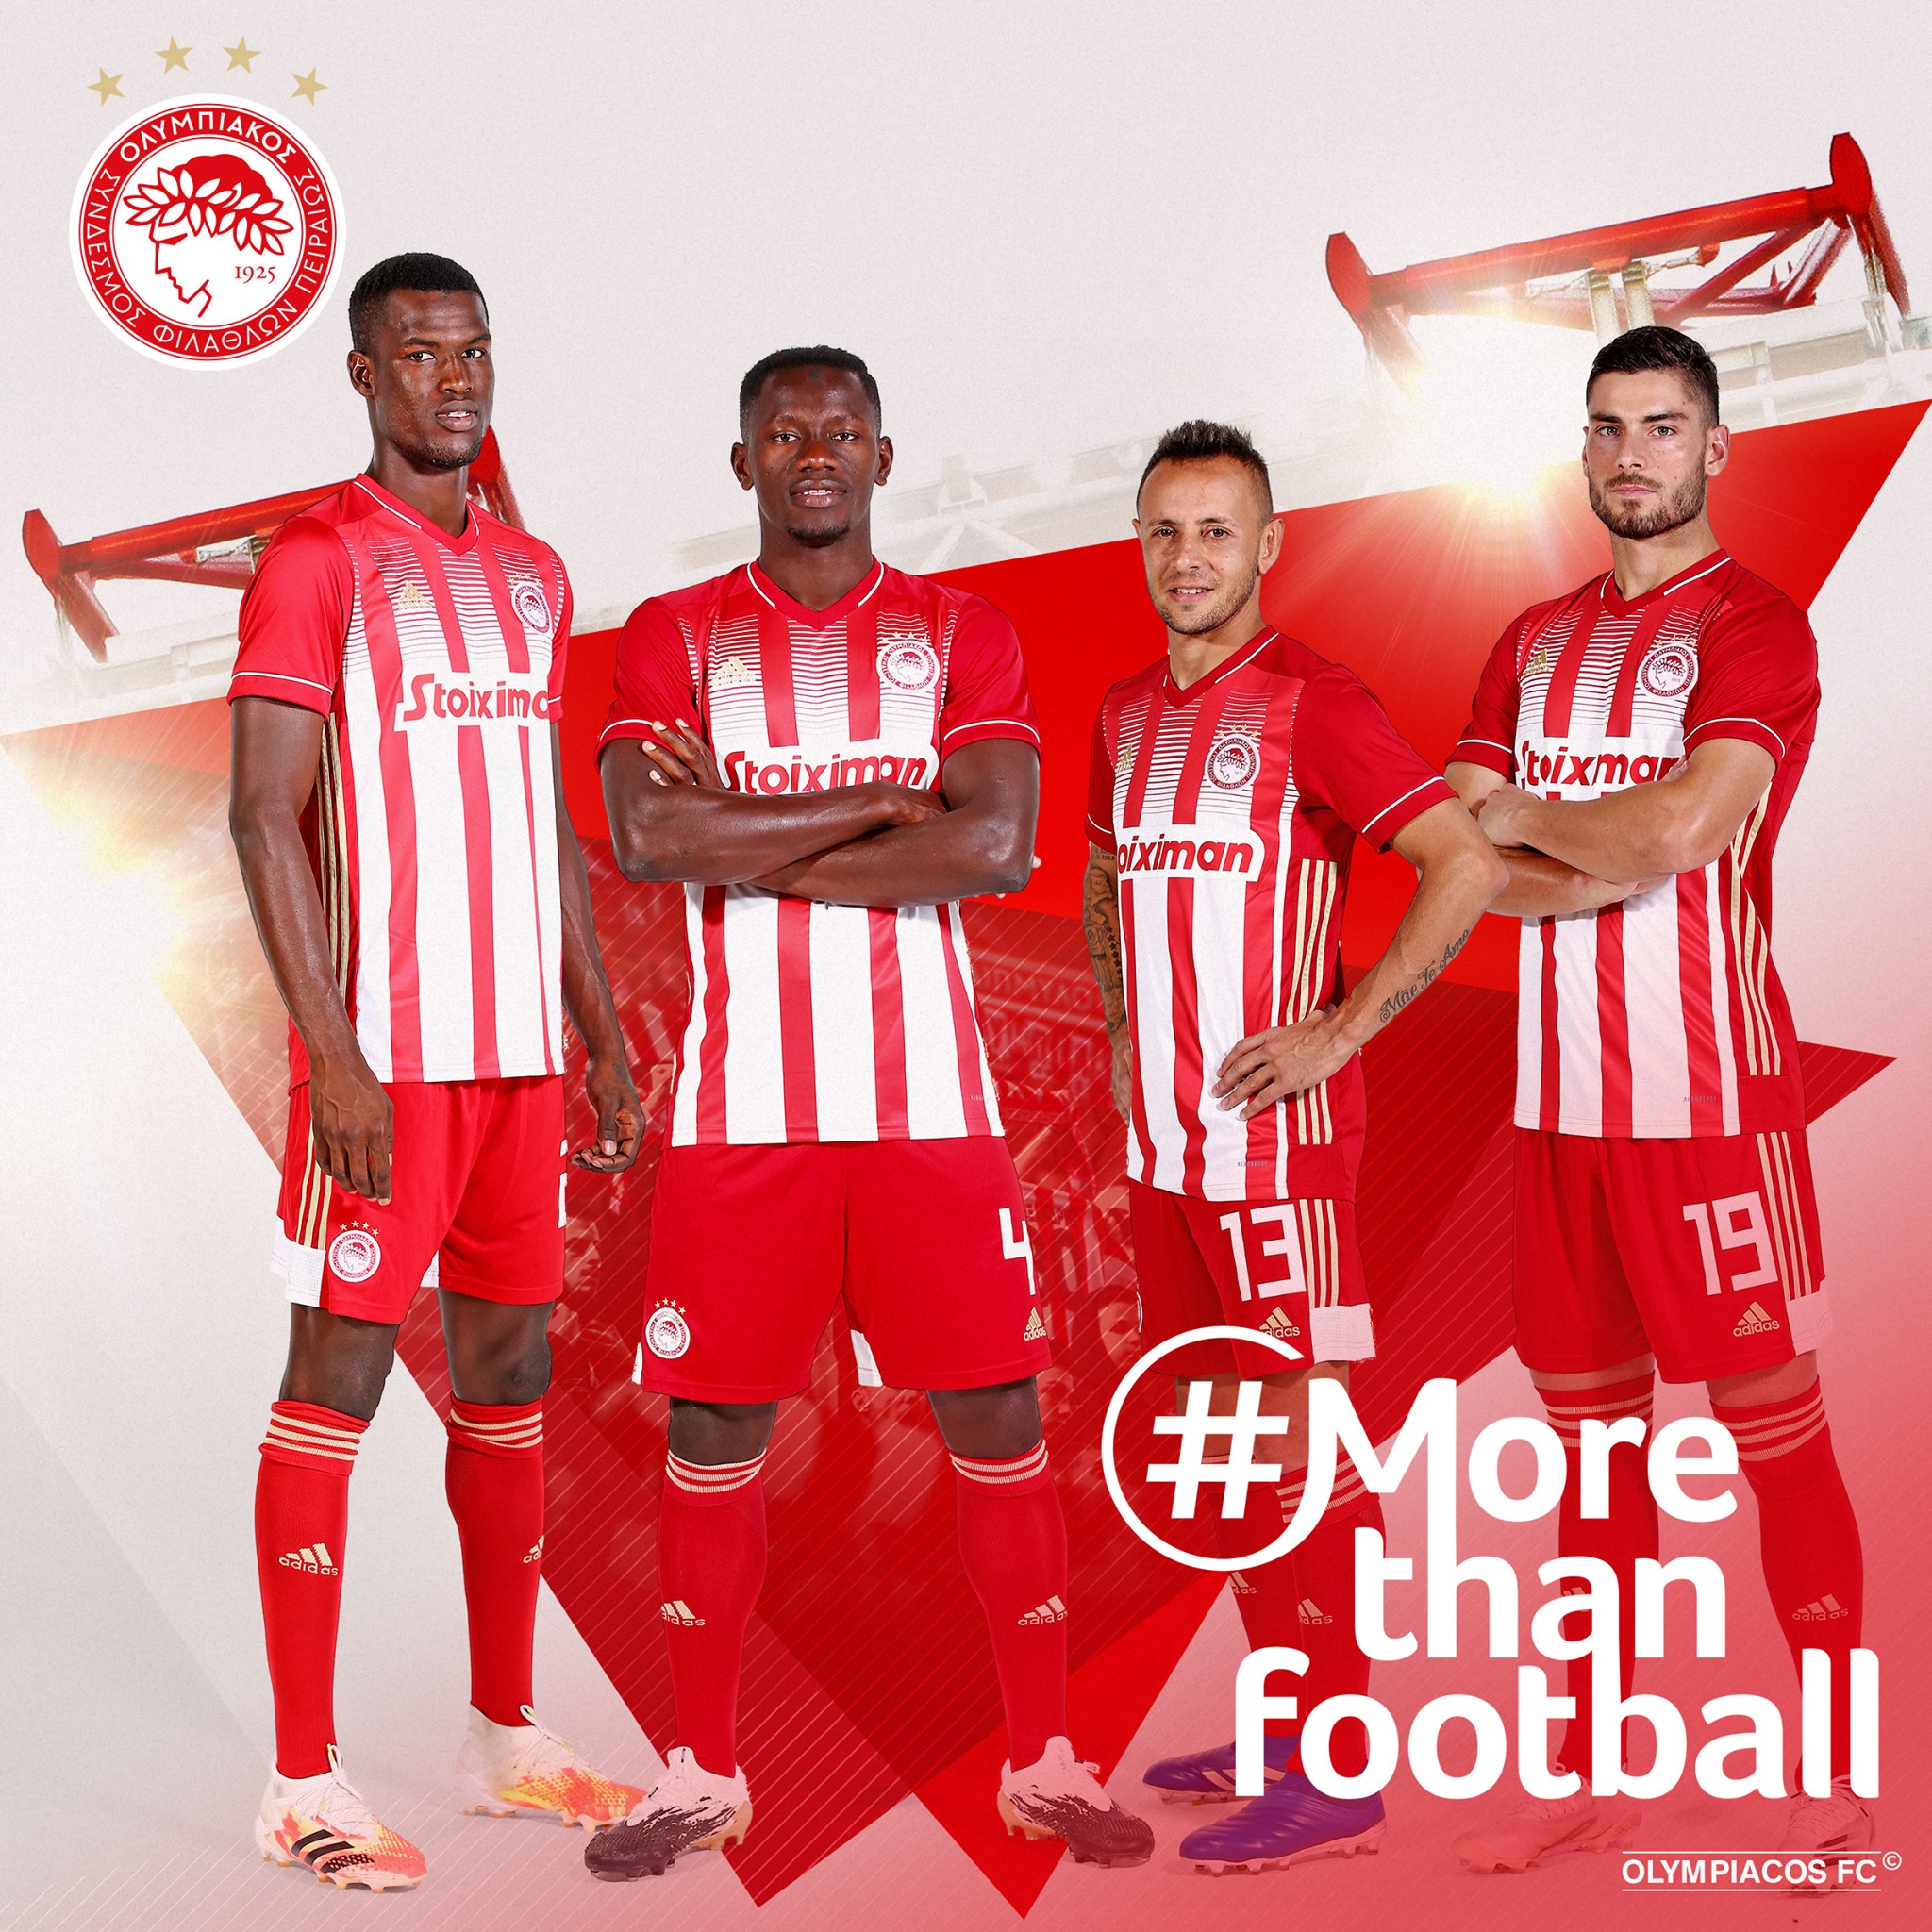 Football Fashion on Twitter: "Olympiacos FC 2020/21 adidas Home, Away and  Third Kits - https://t.co/bIIbsRSfBk #OlympiacosFC #SuperLeagueGreece # adidas #adidasFootball #UCL #Olympiacos #MCIOLY https://t.co/uRqE6NryuC" /  Twitter